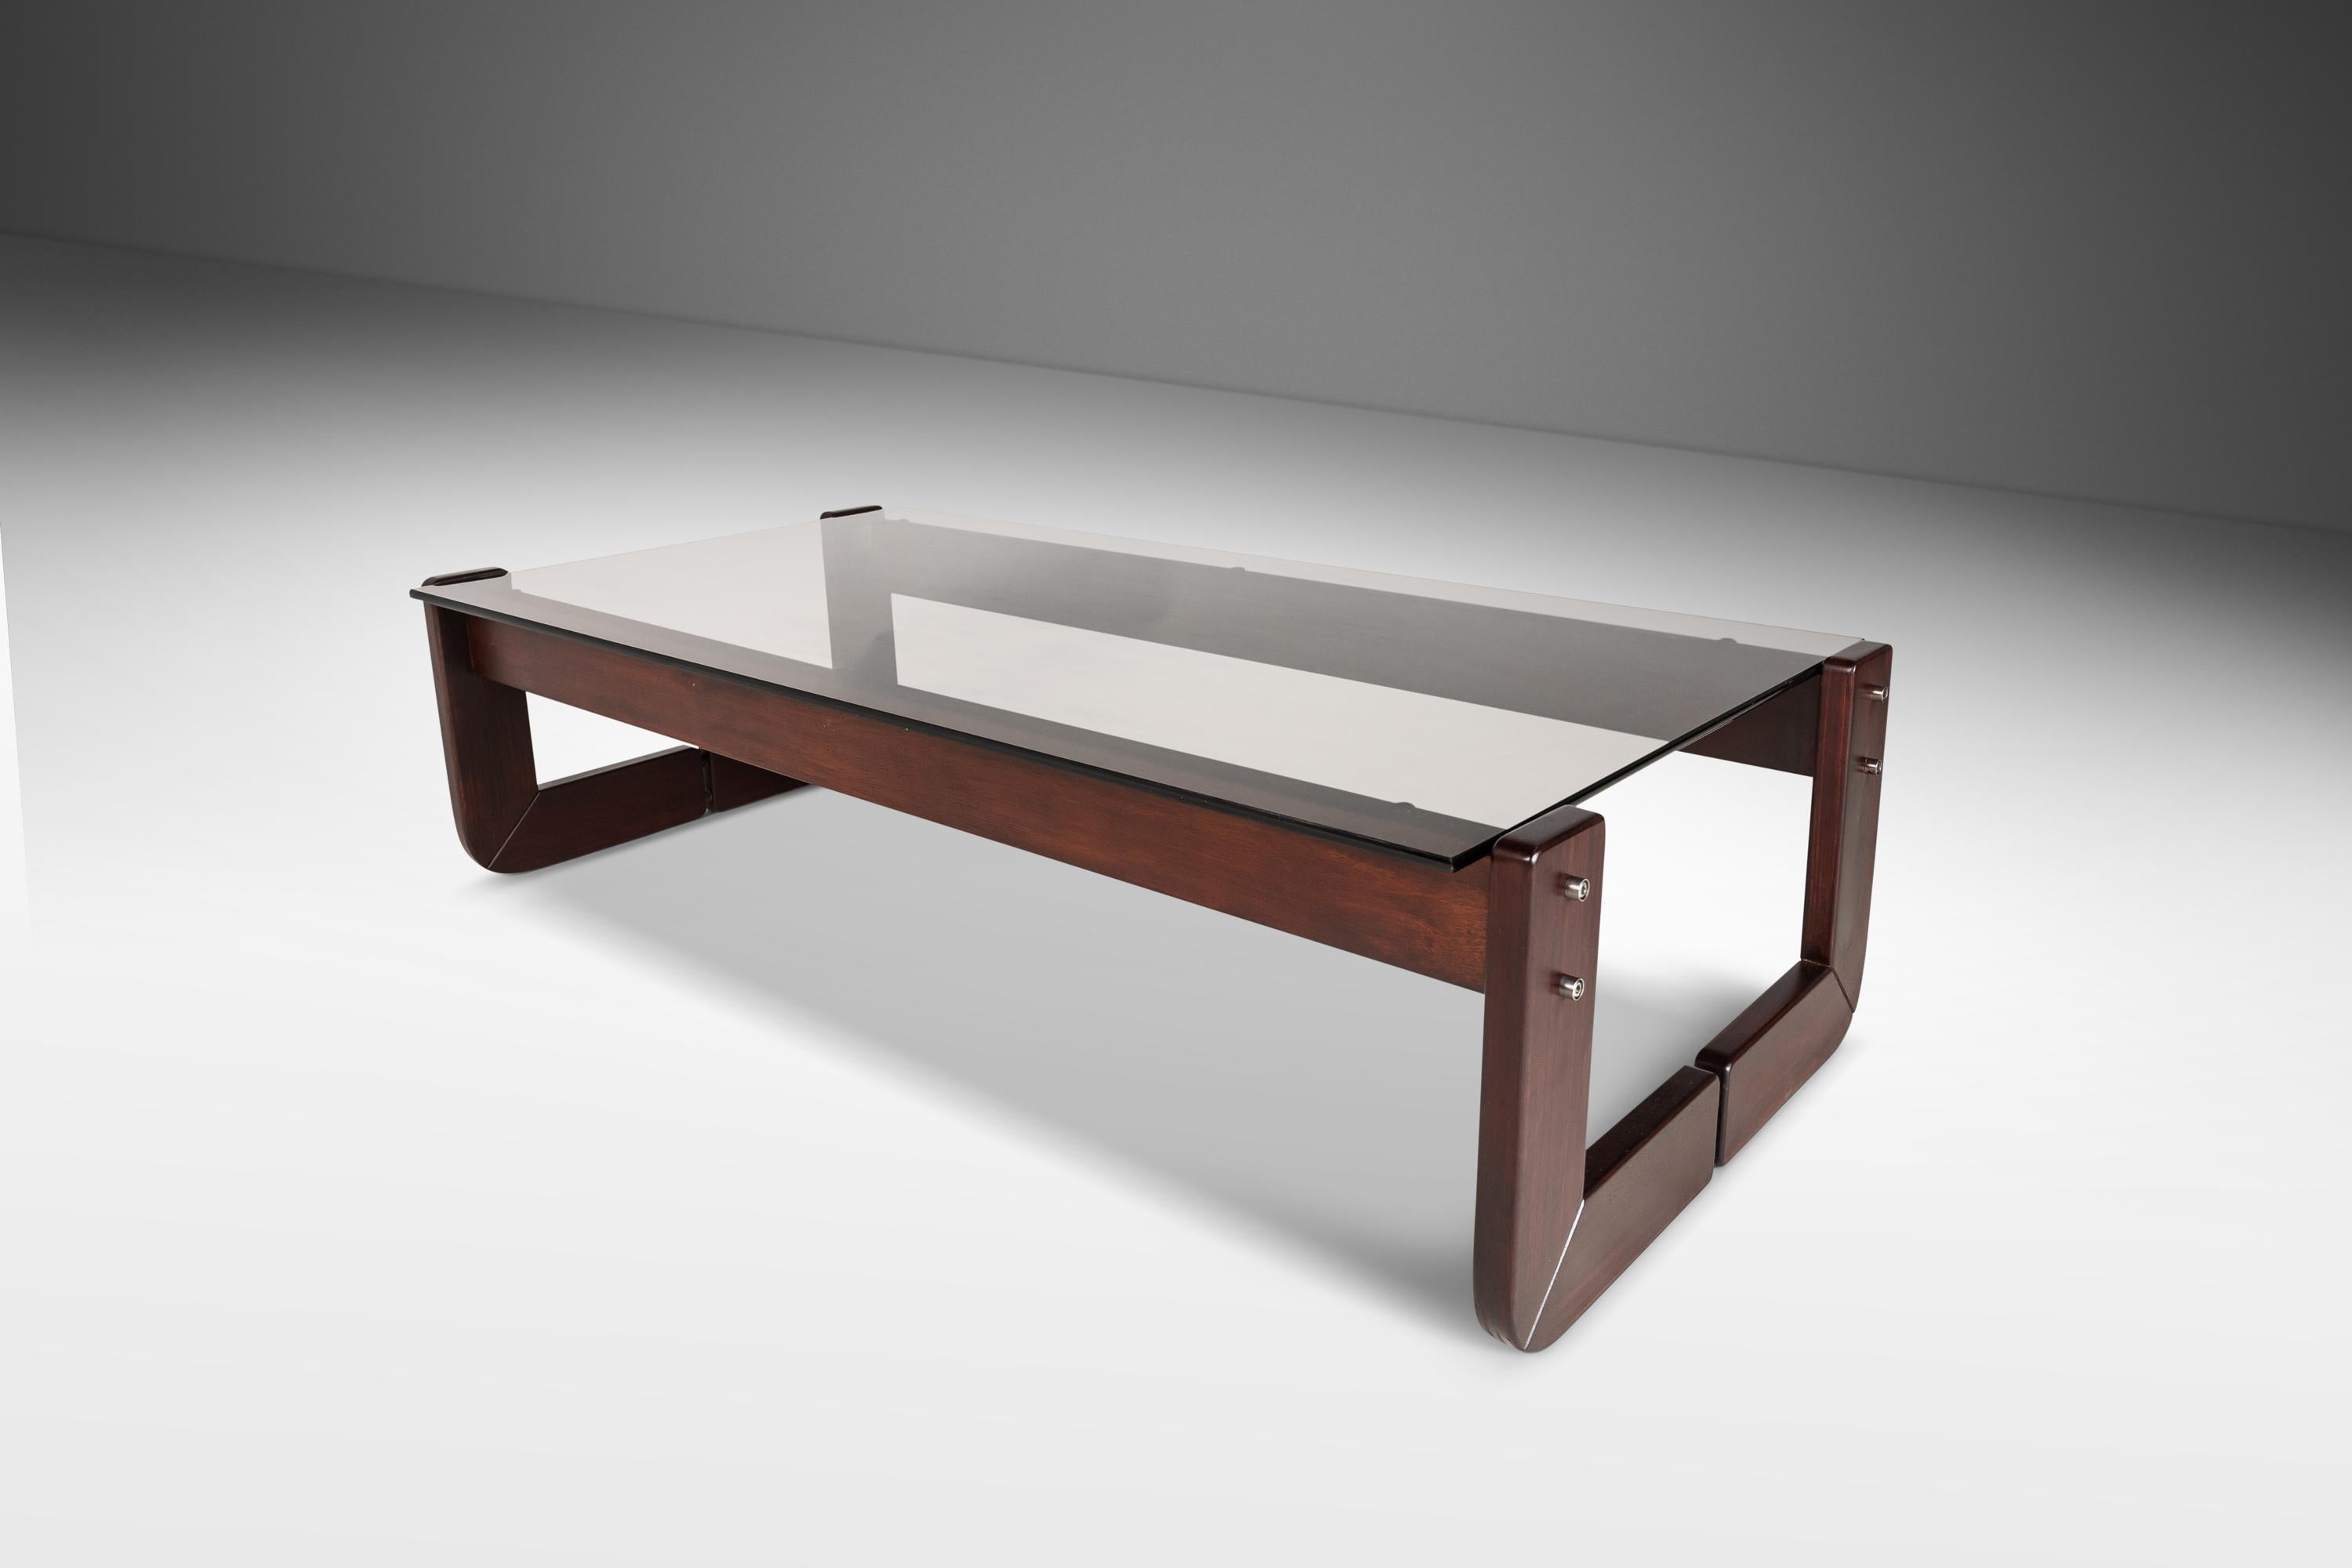 Attention collectors! This alluring coffee table, designed by the incomparable Percival Lafer, is the epitome of Brazilian minimalism for which Lafer and his furniture company are regarded as the paramount makers. The solid jacaranda frame is in